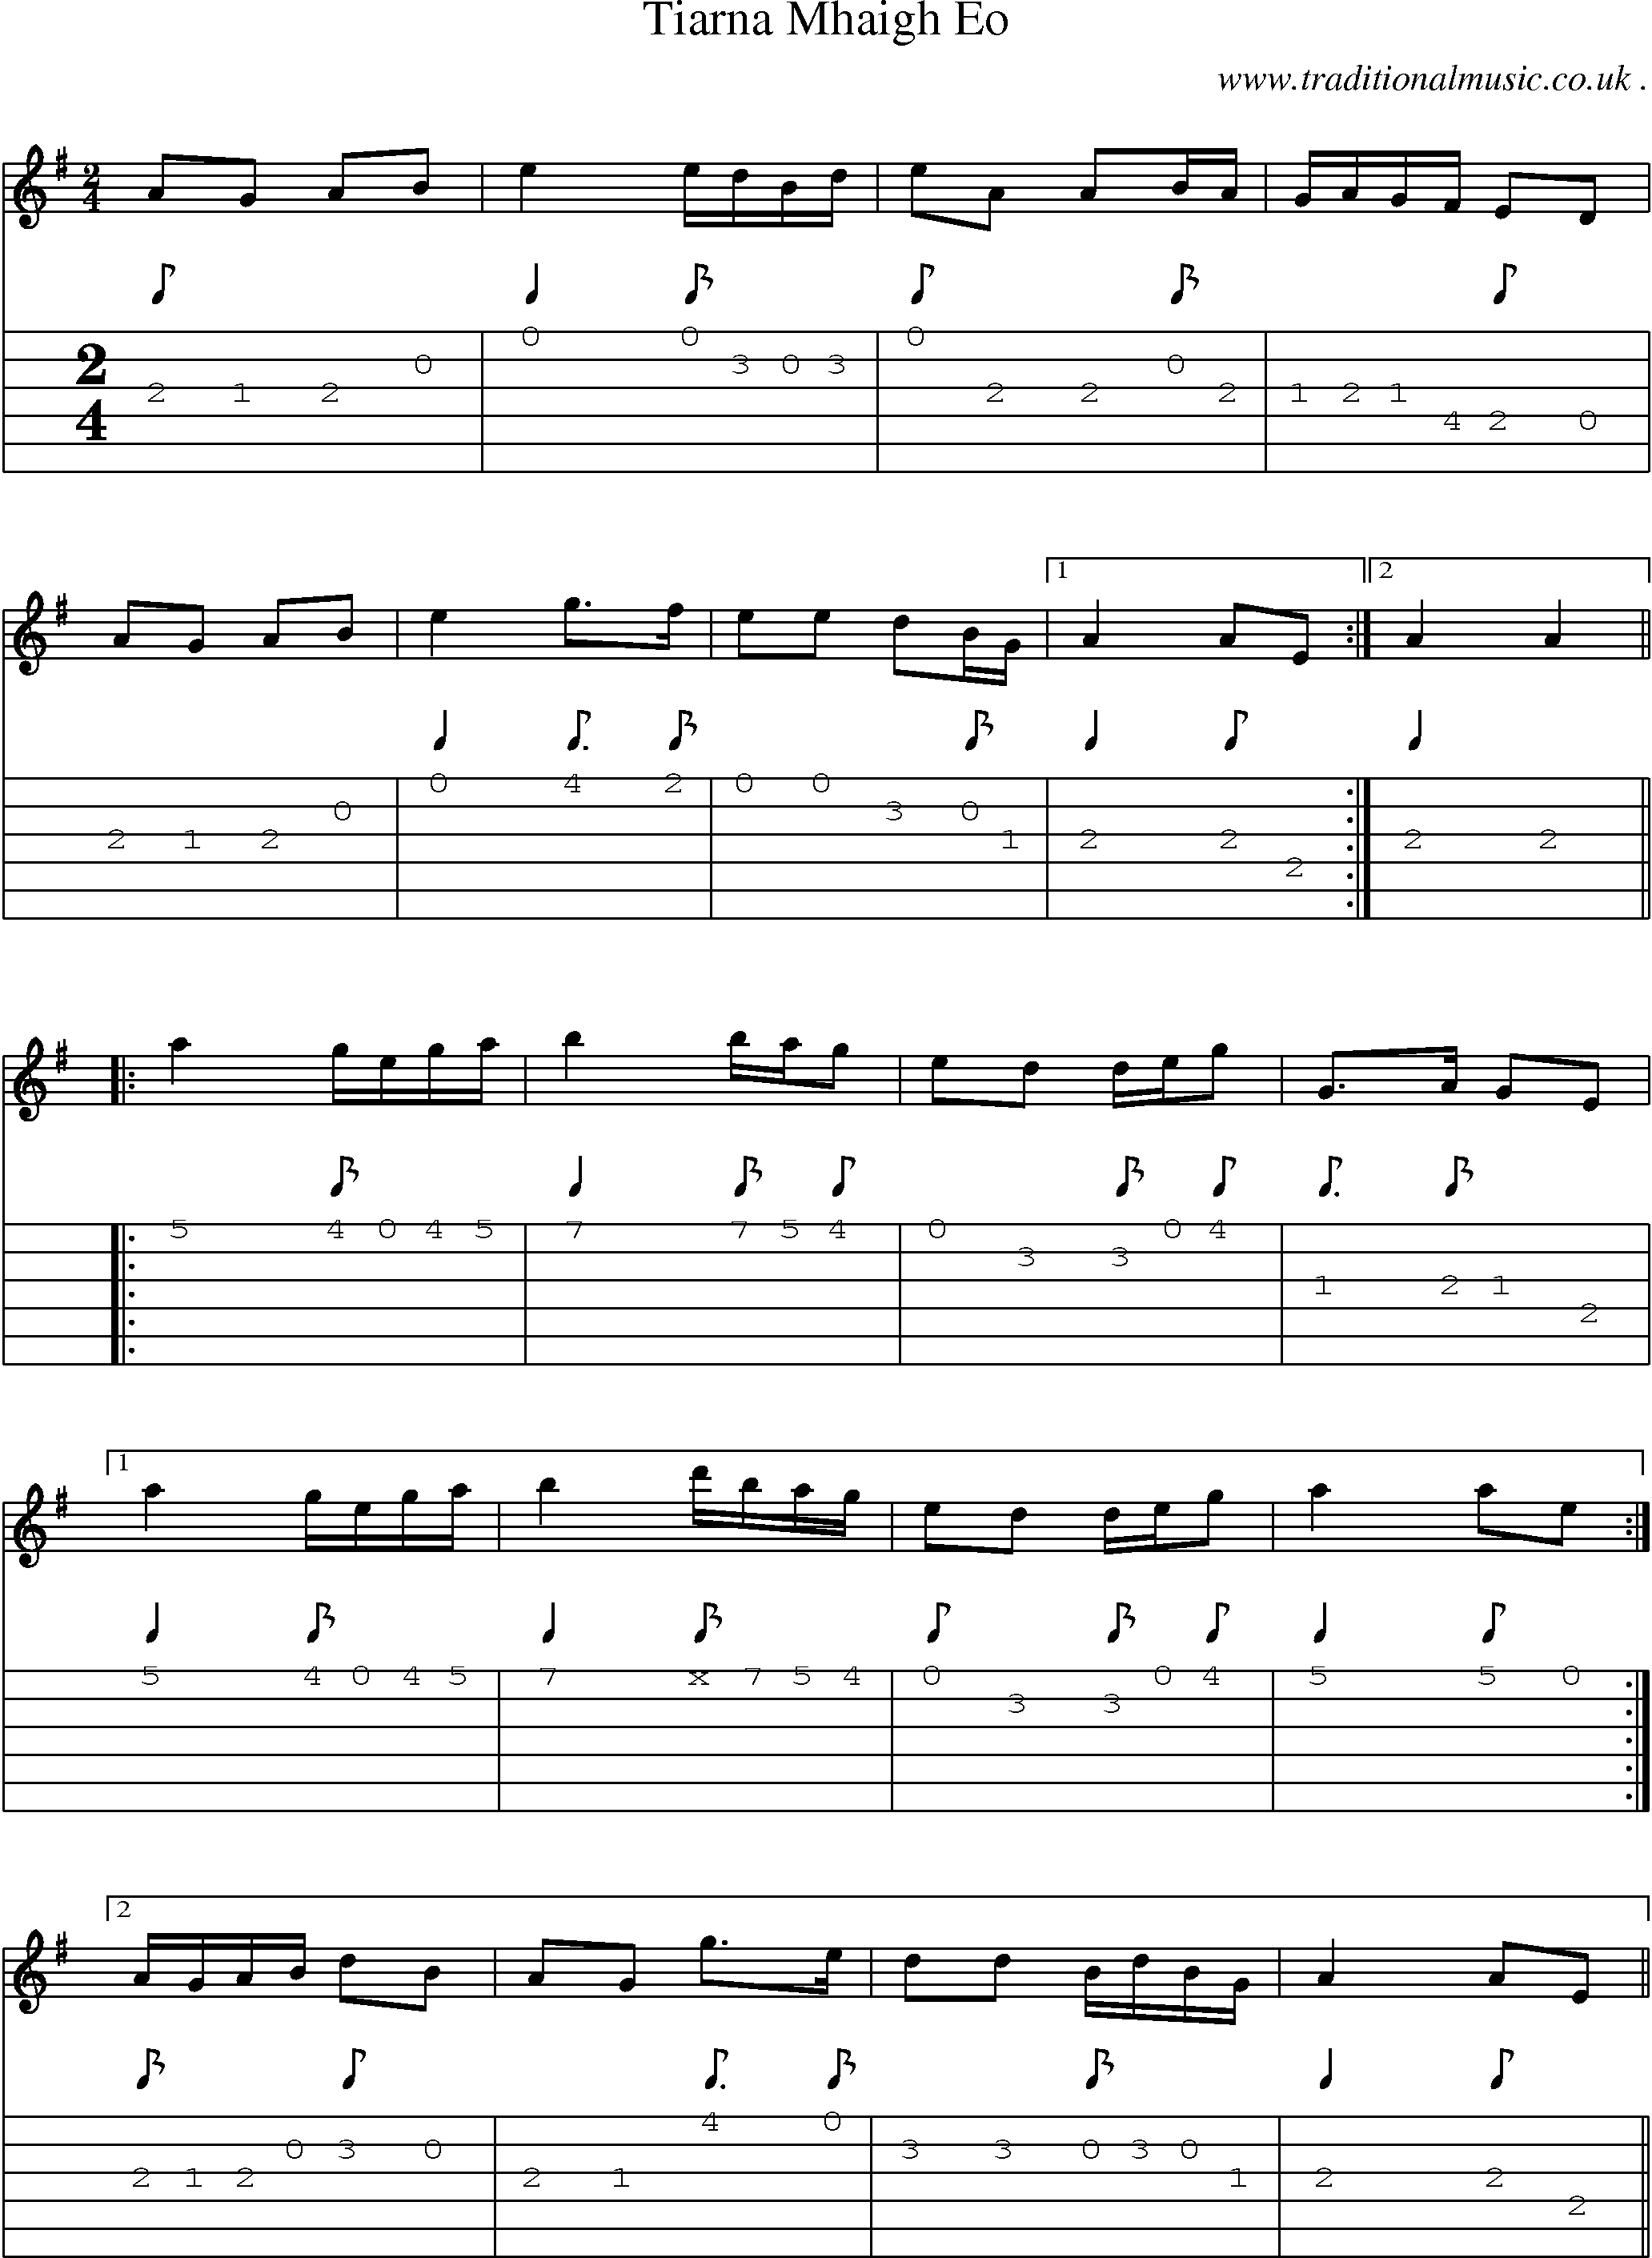 Sheet-Music and Guitar Tabs for Tiarna Mhaigh Eo